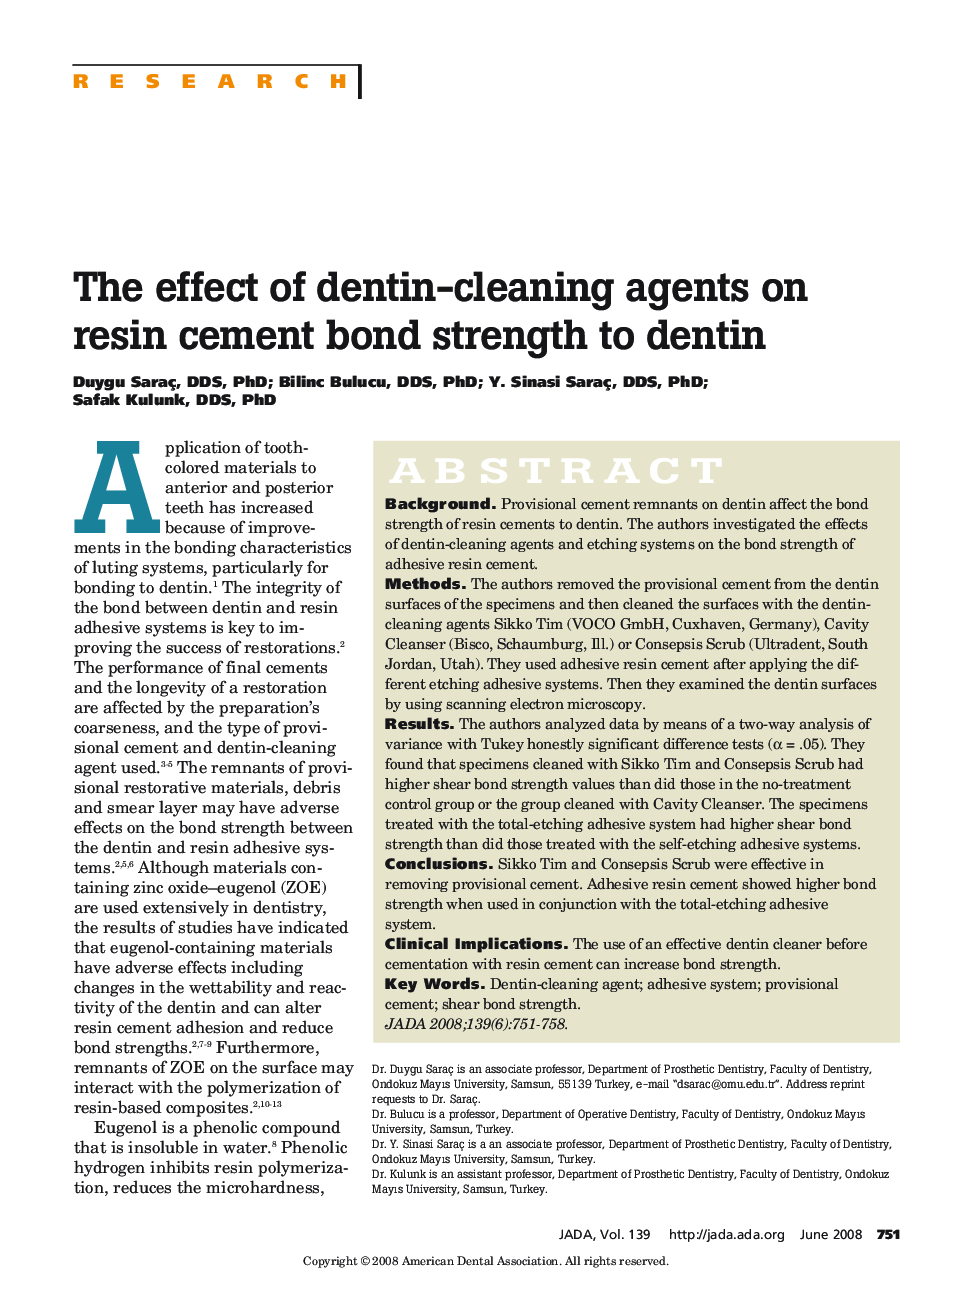 The Effect of Dentin-Cleaning Agents on Resin Cement Bond Strength to Dentin 